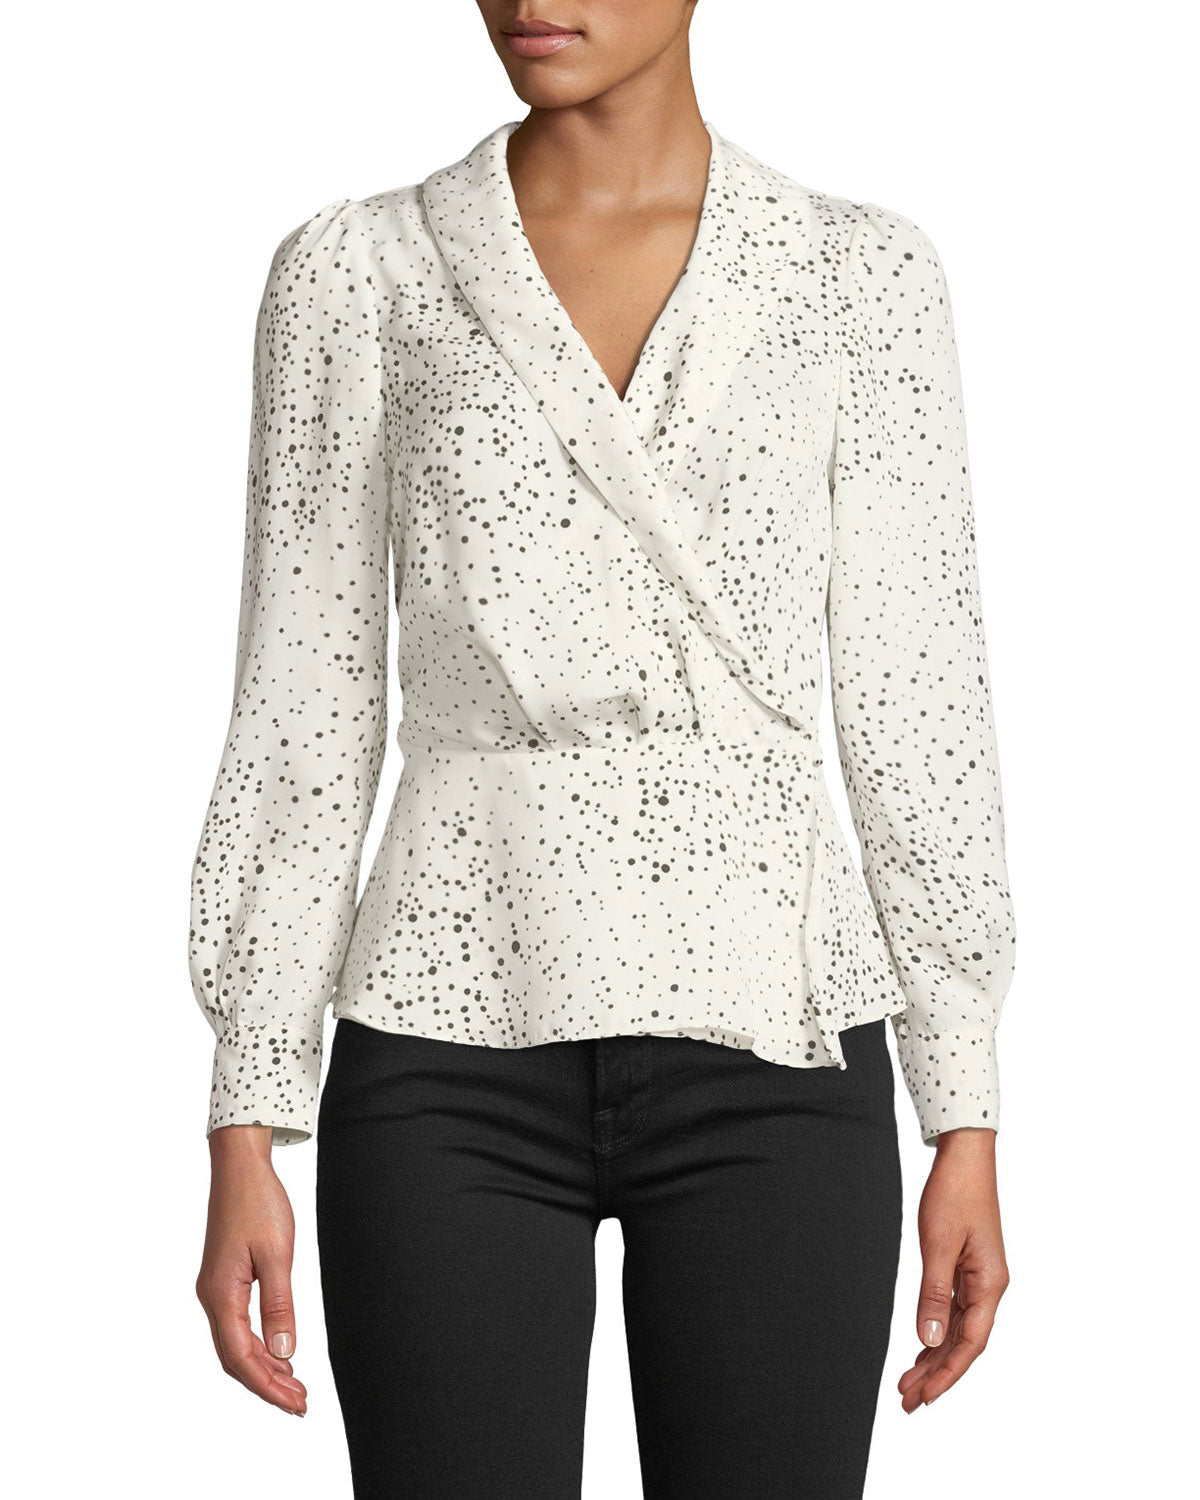 Diego Ivory/Blk Wrap Blouse